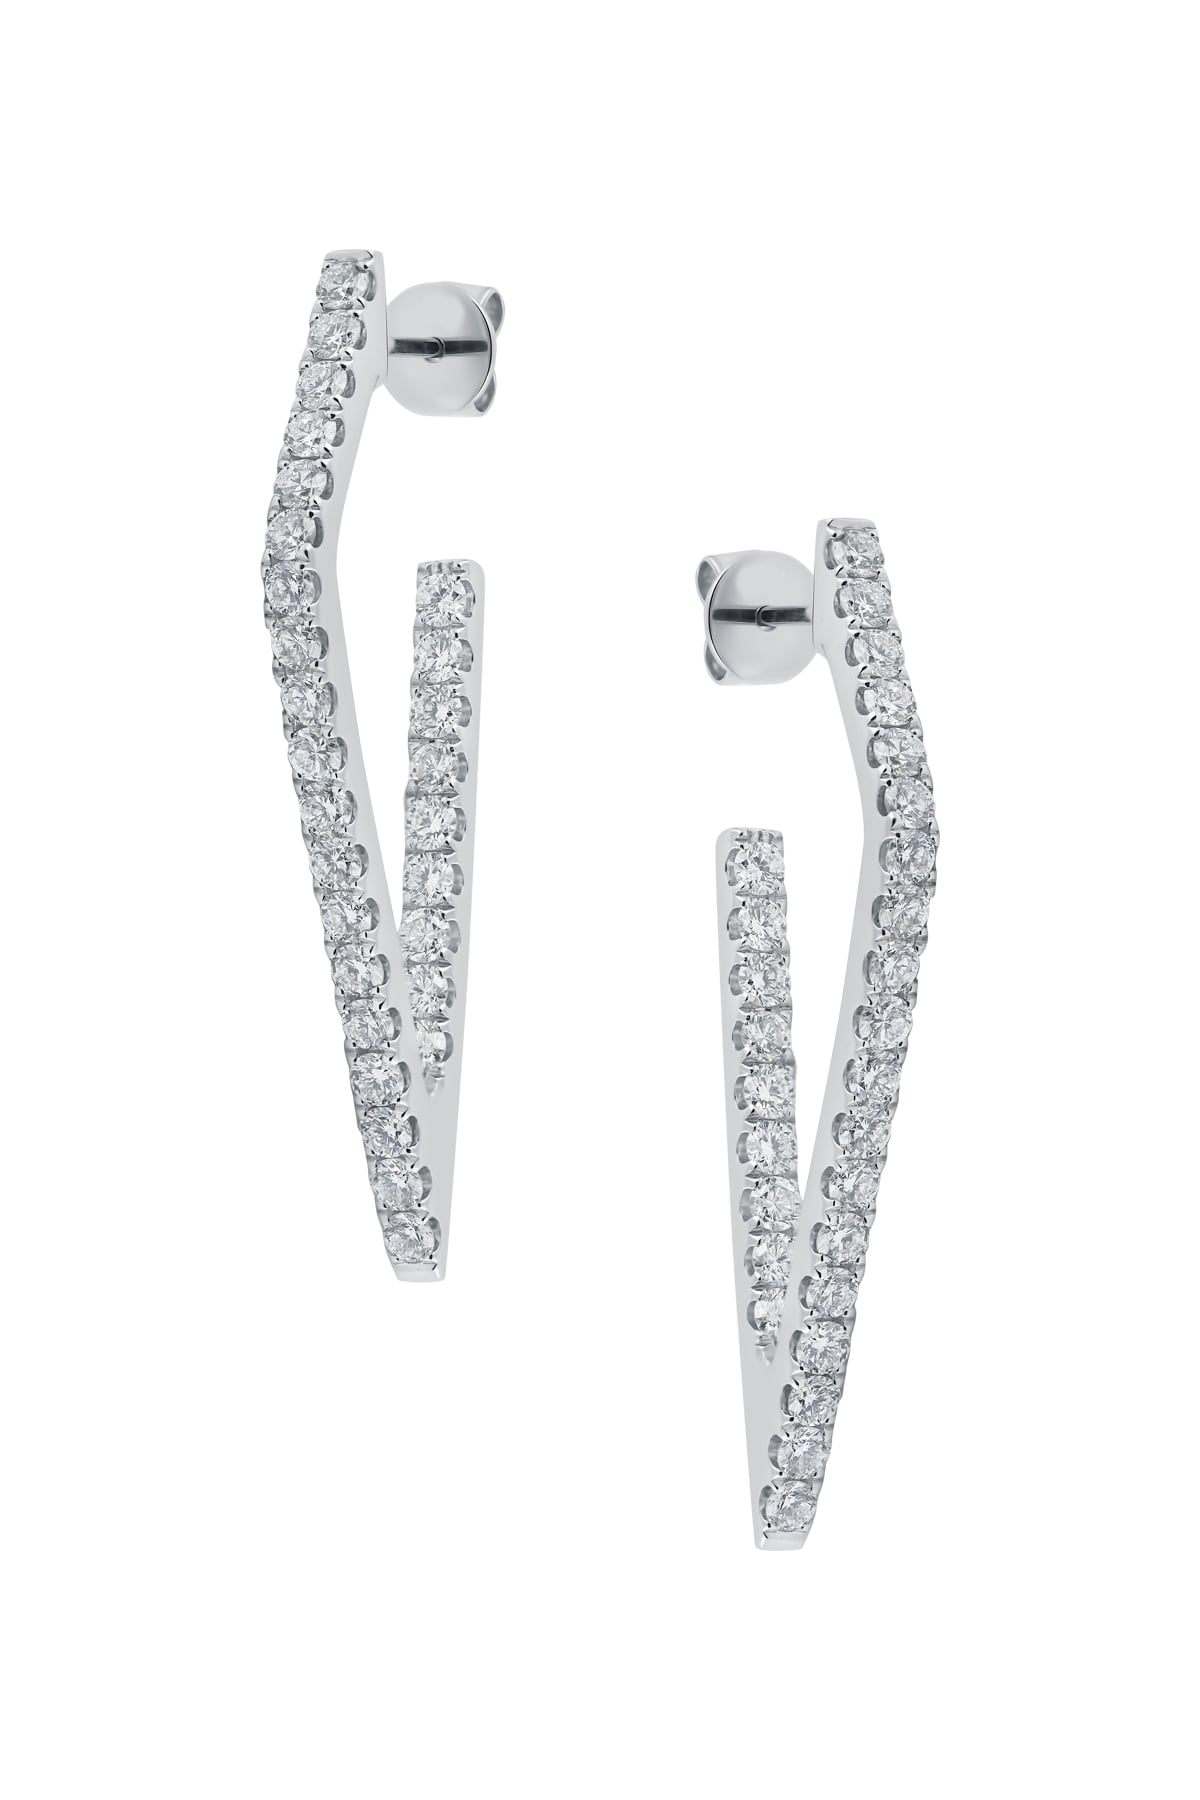 Long Triangular Shaped Diamond Drop Earrings In White Gold from LeGassick Jewellers Gold Coast.